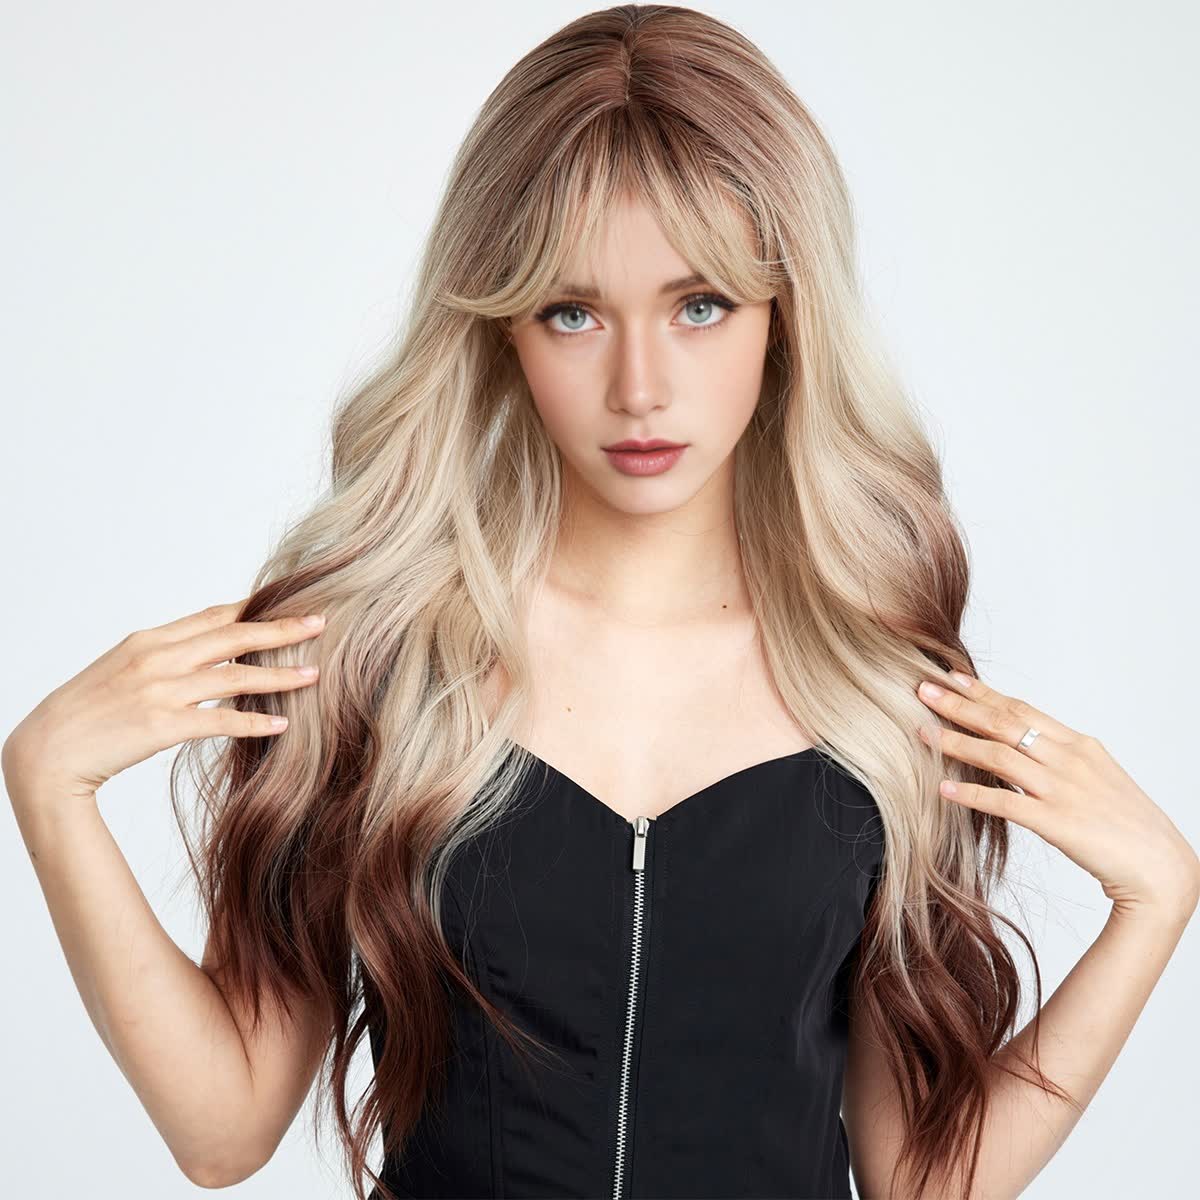 [Ash Storm] 26-inch Ombre Blonde Brown Loose Wave with Bangs (Synthetic Wig)